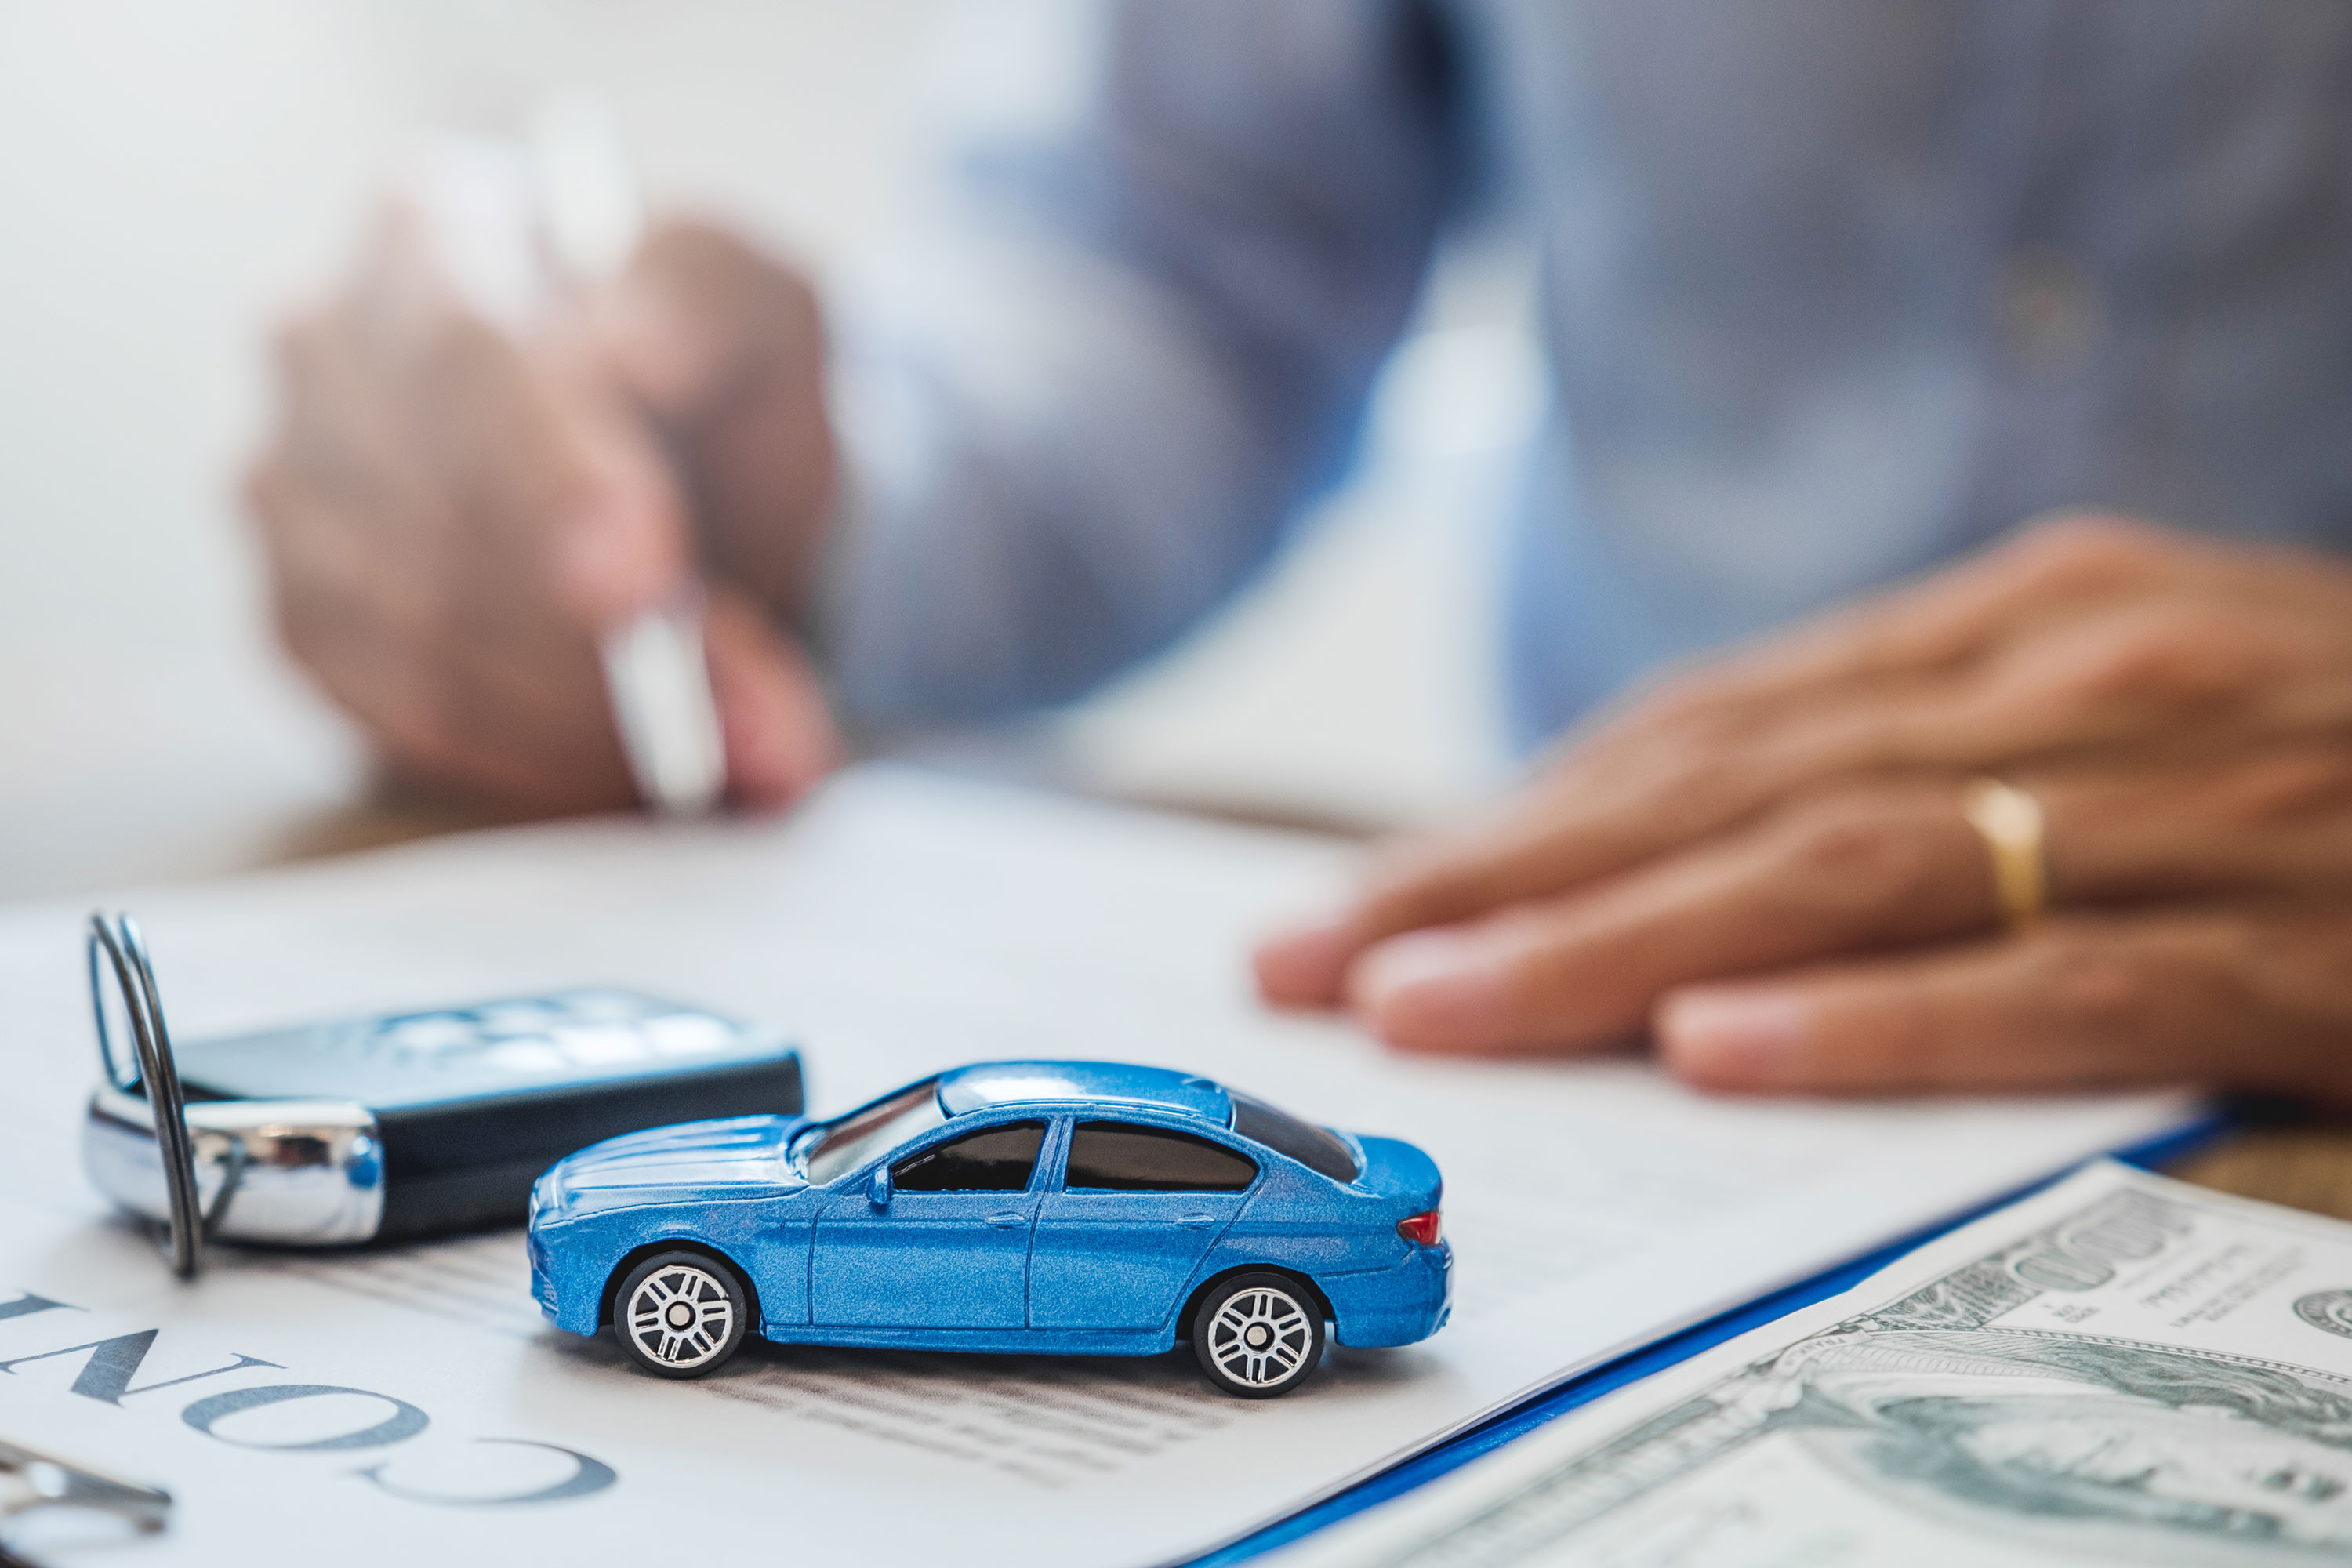 How to File a Car Insurance Claim?